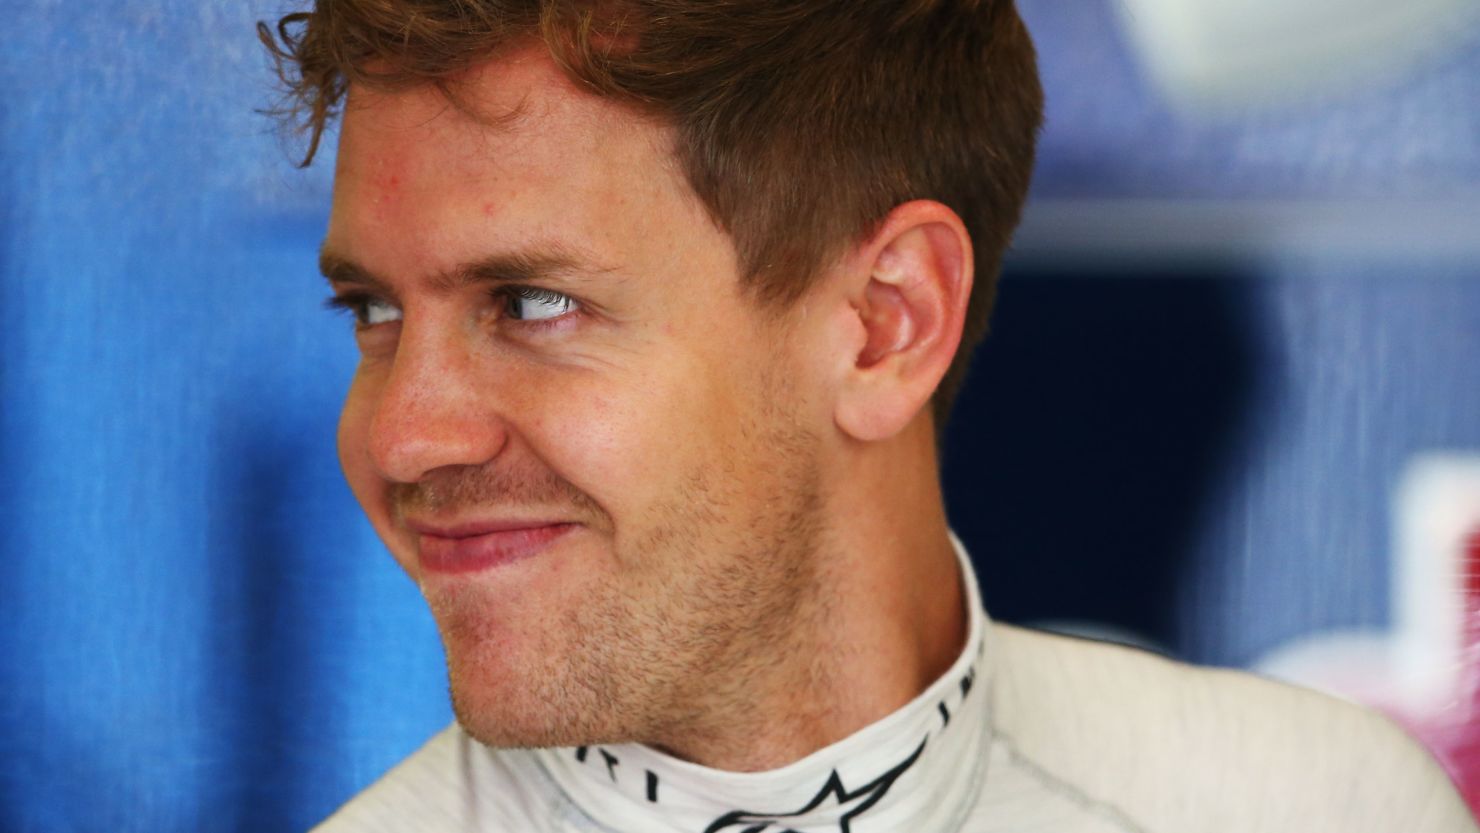 Sebastian Vettel could become only the third driver to win four consecutive world championships.